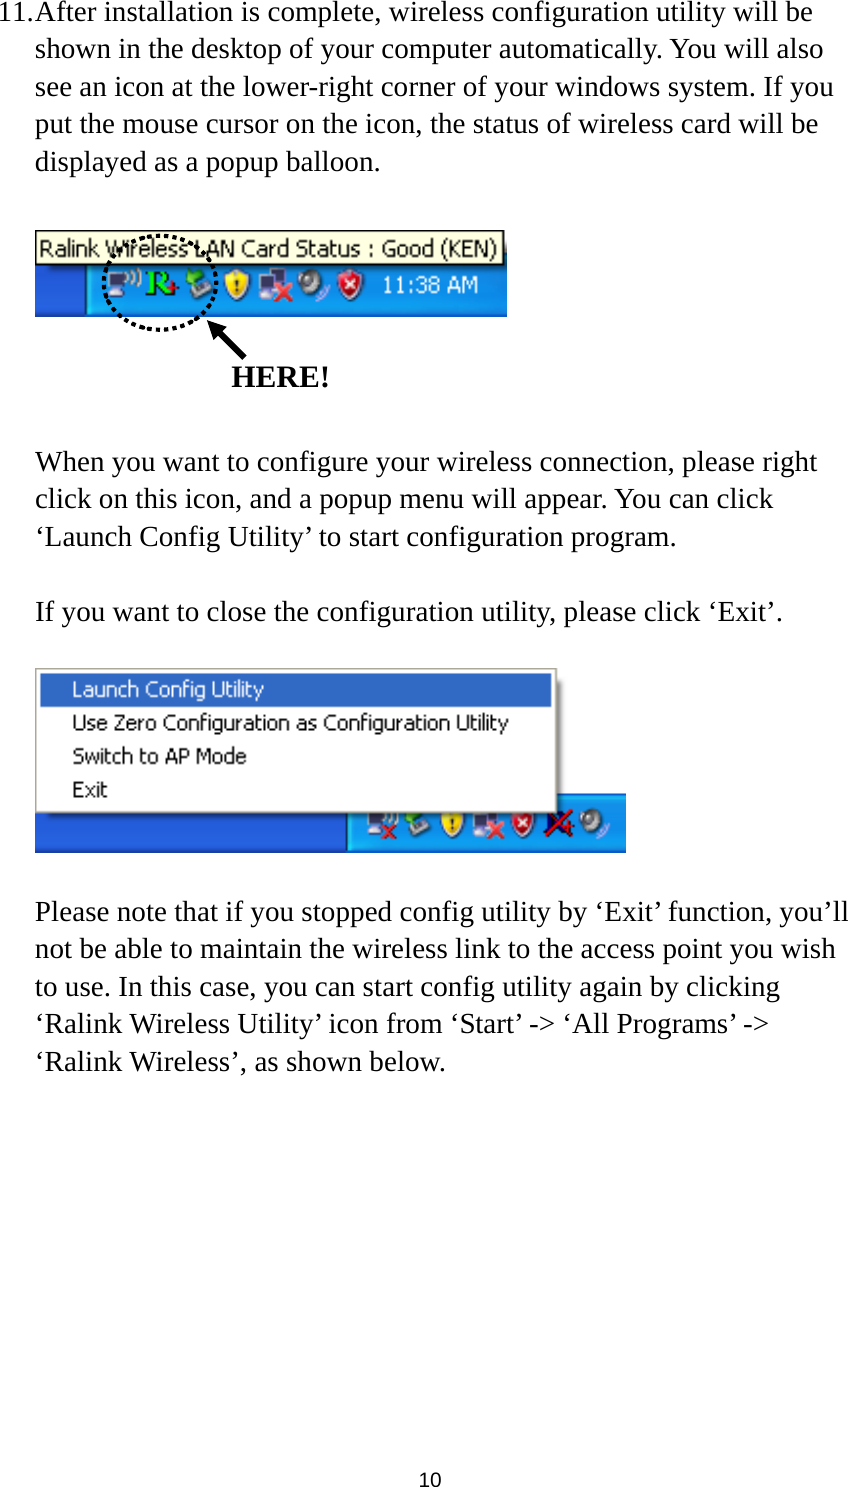  10 11. After installation is complete, wireless configuration utility will be shown in the desktop of your computer automatically. You will also see an icon at the lower-right corner of your windows system. If you put the mouse cursor on the icon, the status of wireless card will be displayed as a popup balloon.      When you want to configure your wireless connection, please right click on this icon, and a popup menu will appear. You can click ‘Launch Config Utility’ to start configuration program.  If you want to close the configuration utility, please click ‘Exit’.    Please note that if you stopped config utility by ‘Exit’ function, you’ll not be able to maintain the wireless link to the access point you wish to use. In this case, you can start config utility again by clicking ‘Ralink Wireless Utility’ icon from ‘Start’ -&gt; ‘All Programs’ -&gt; ‘Ralink Wireless’, as shown below.   HERE!